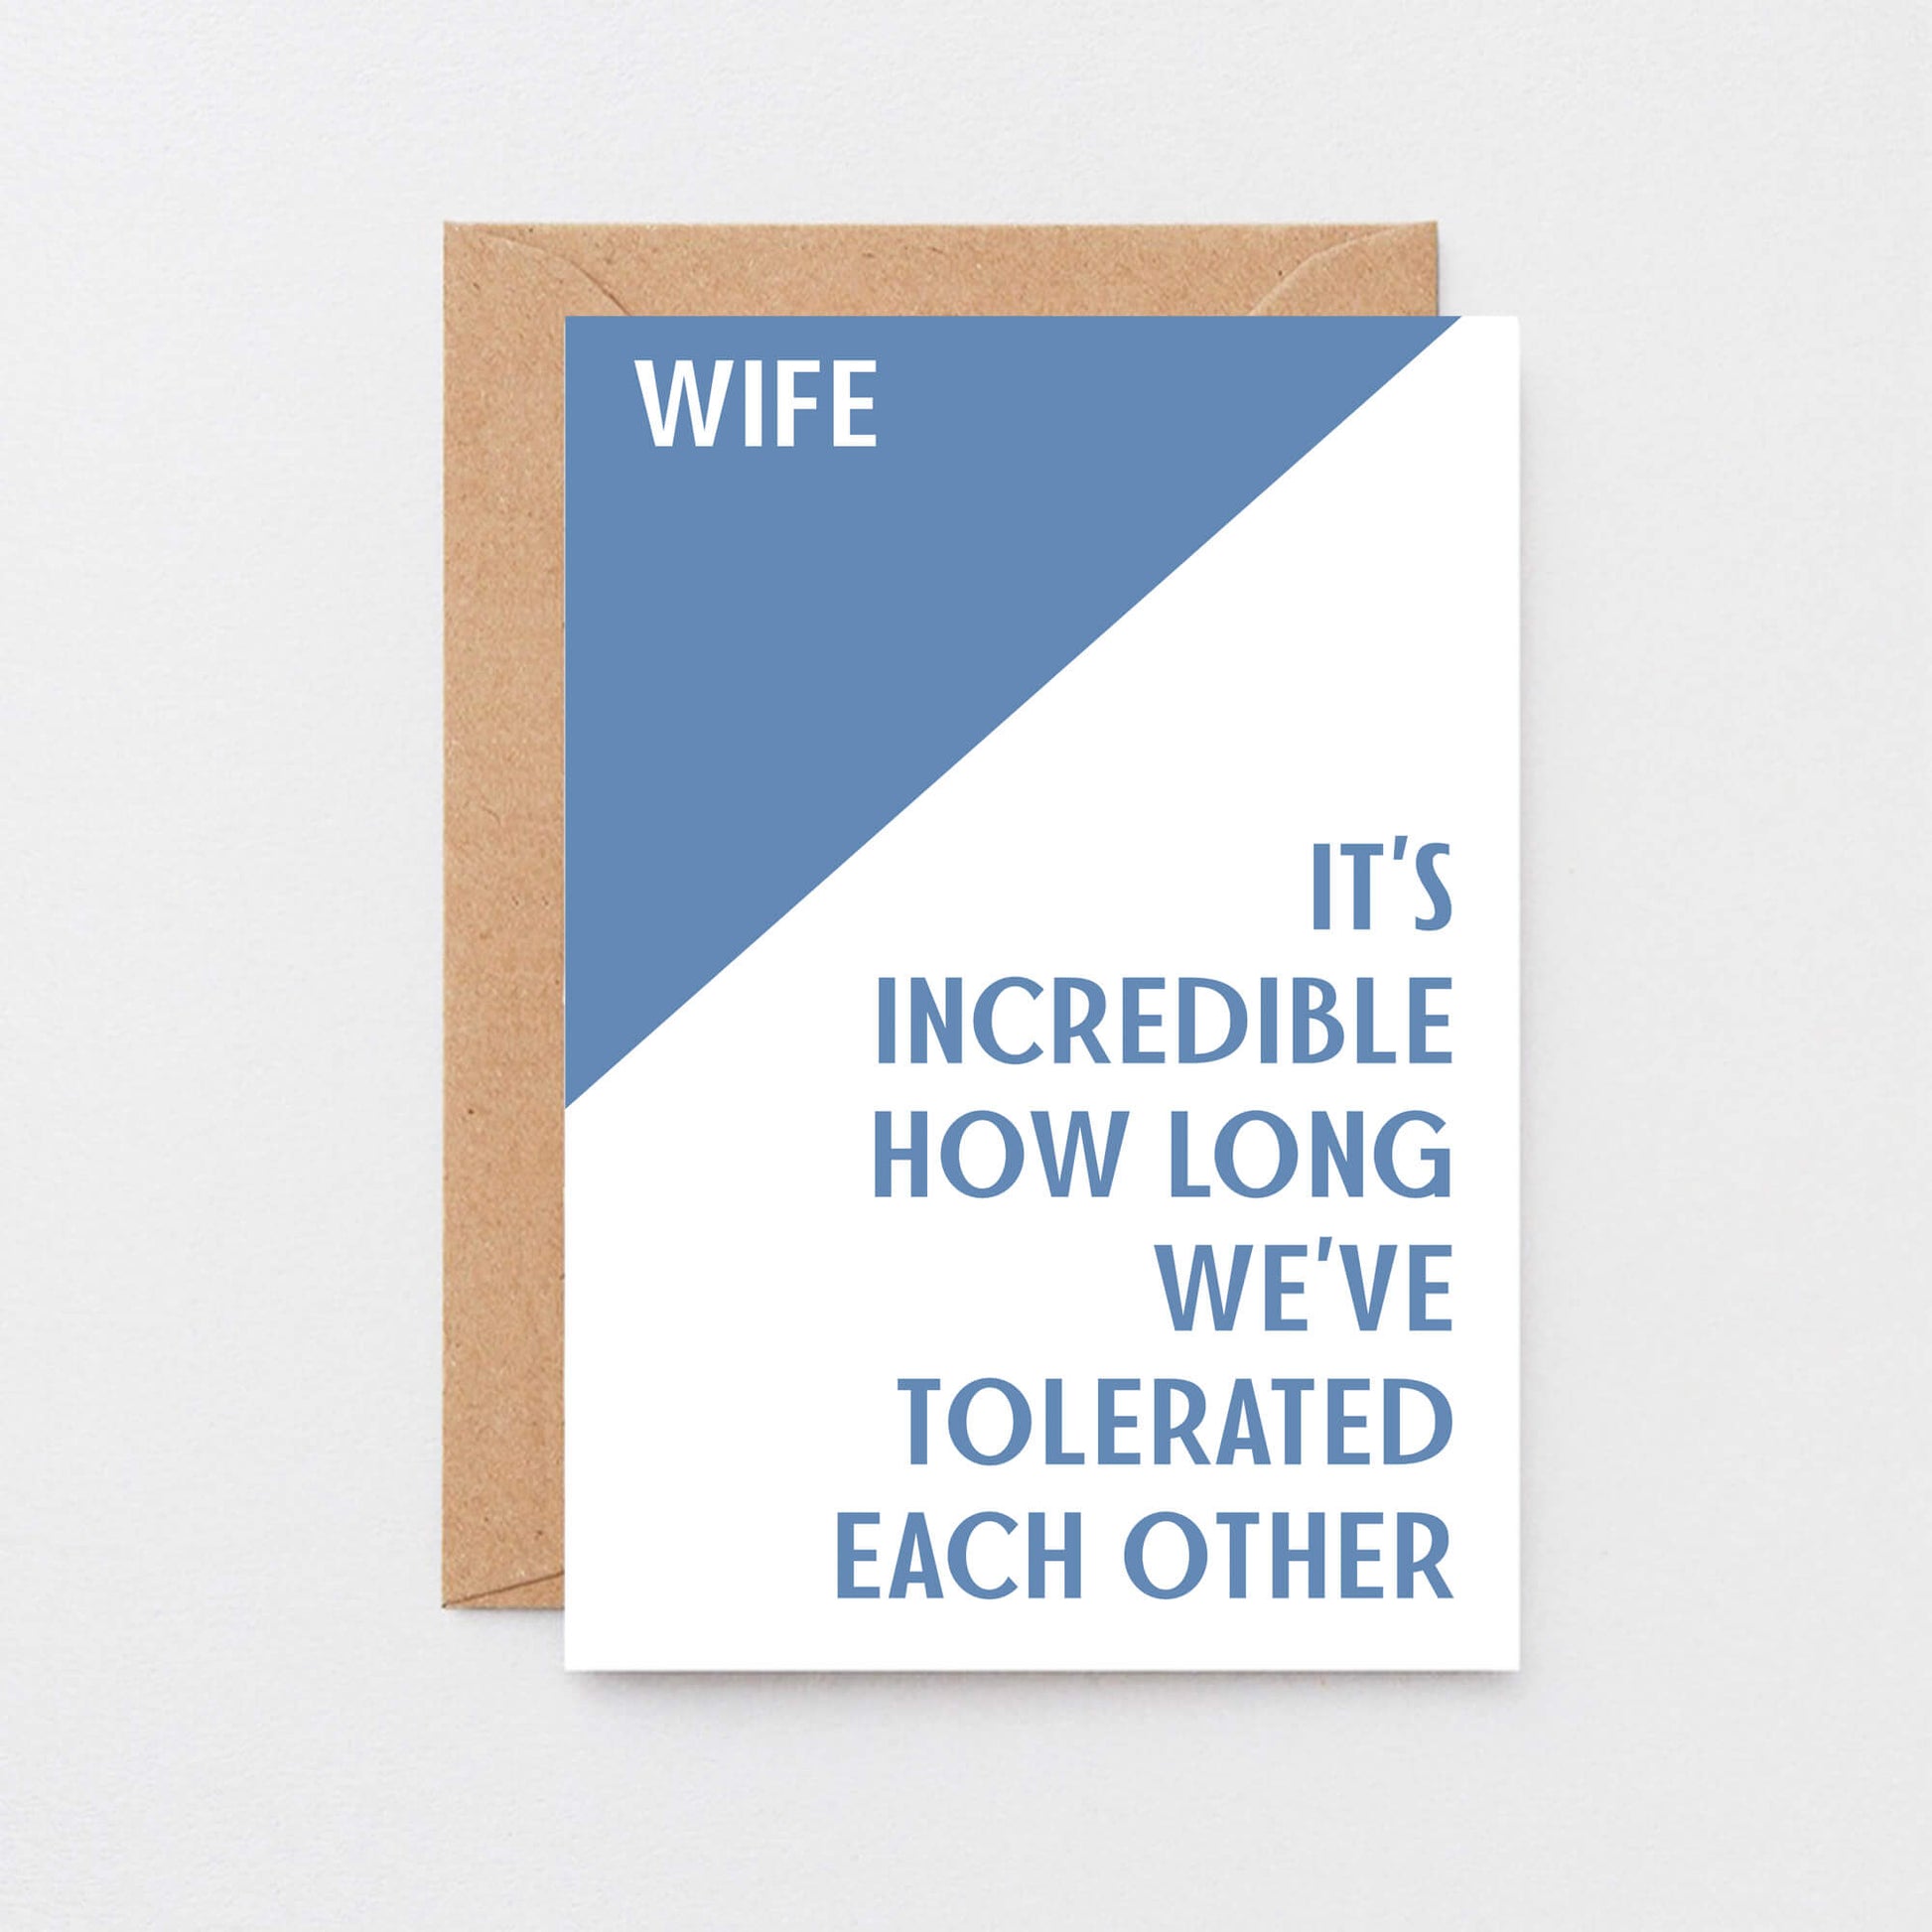 Wife Card by SixElevenCreations. Reads Wife It's incredible how long we've tolerated each other. Product Code SE3008A6